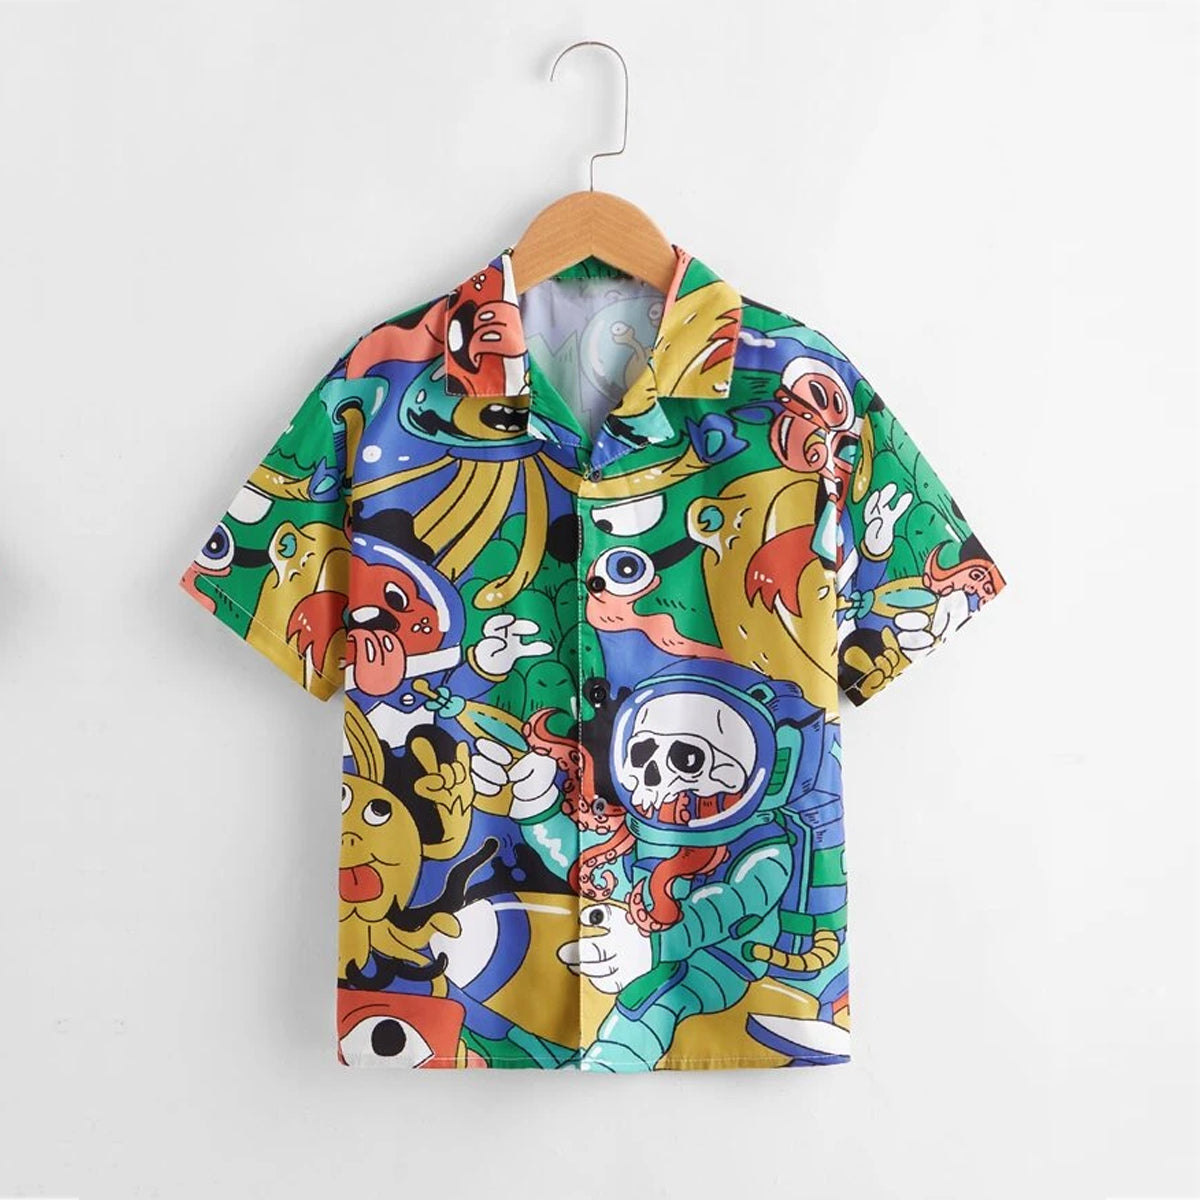 Venutaloza Boy's Tropical Casual Tree & Cartoon Graphic and Outdoor Tree Designer Button Front (Combo Pack Of 3) Shirt For Boy.